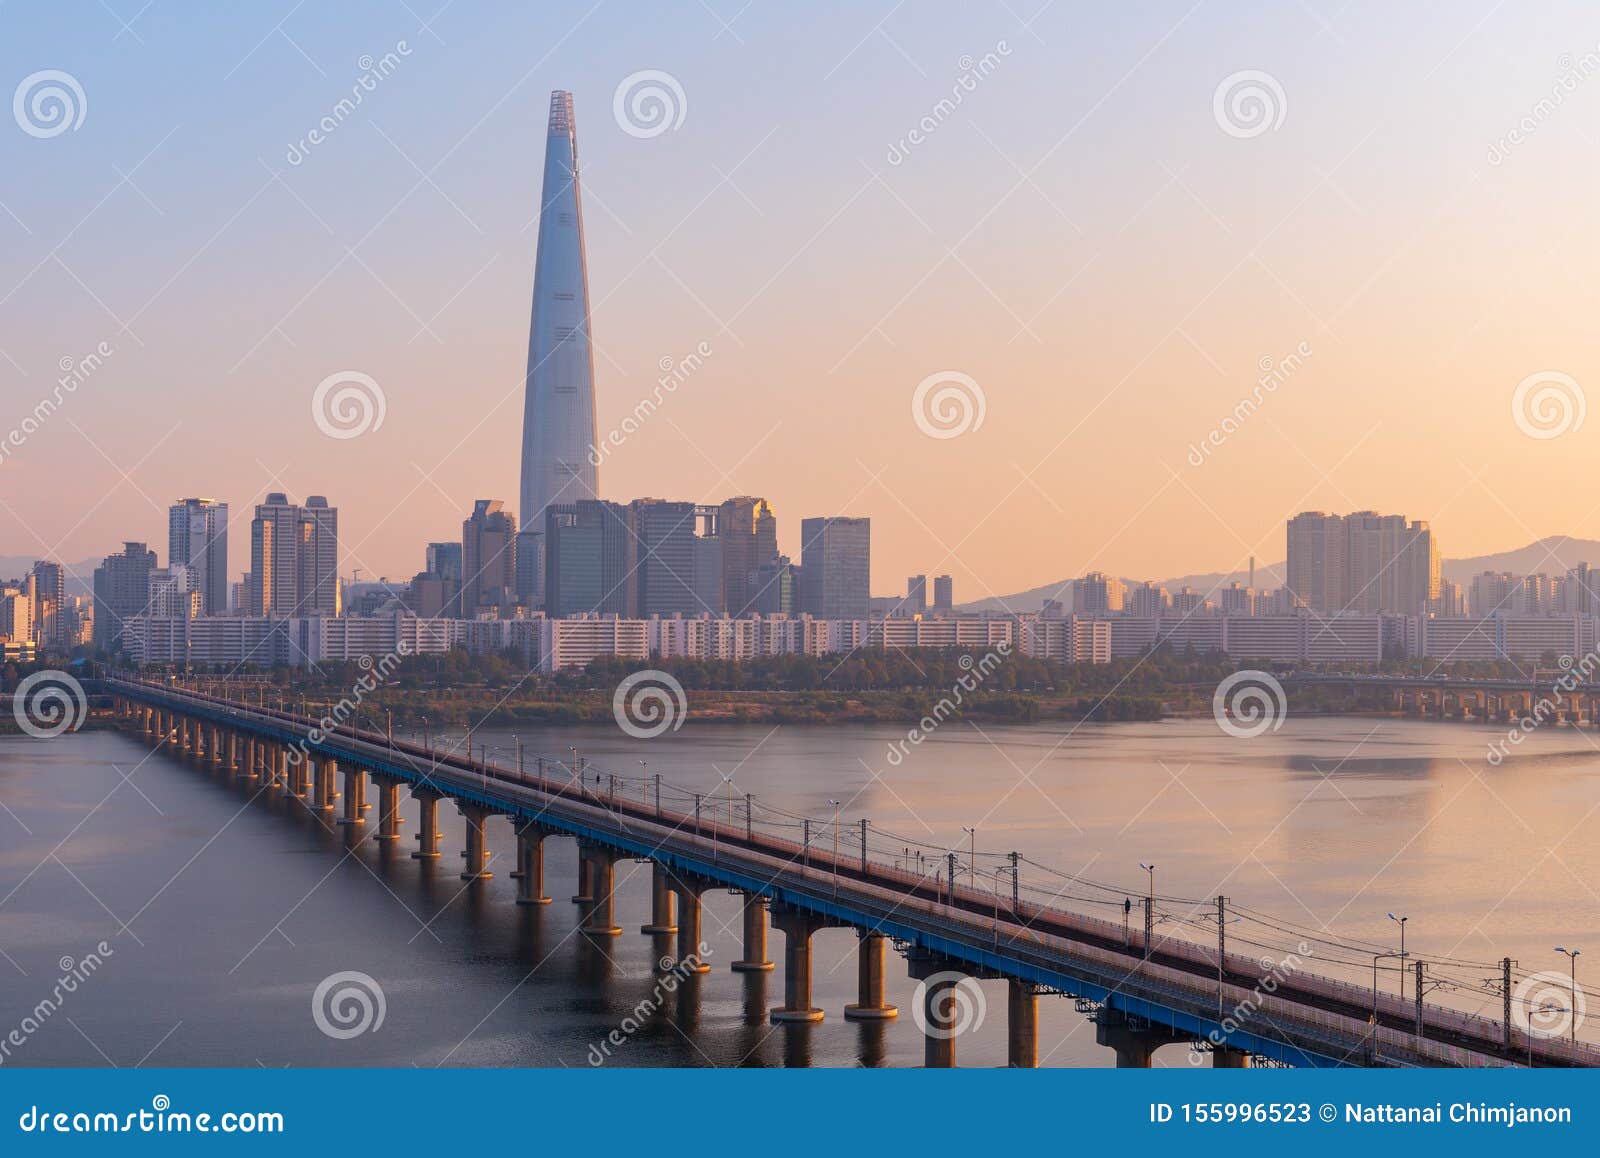 sunset of seoul subway and lotte tower, south korea.